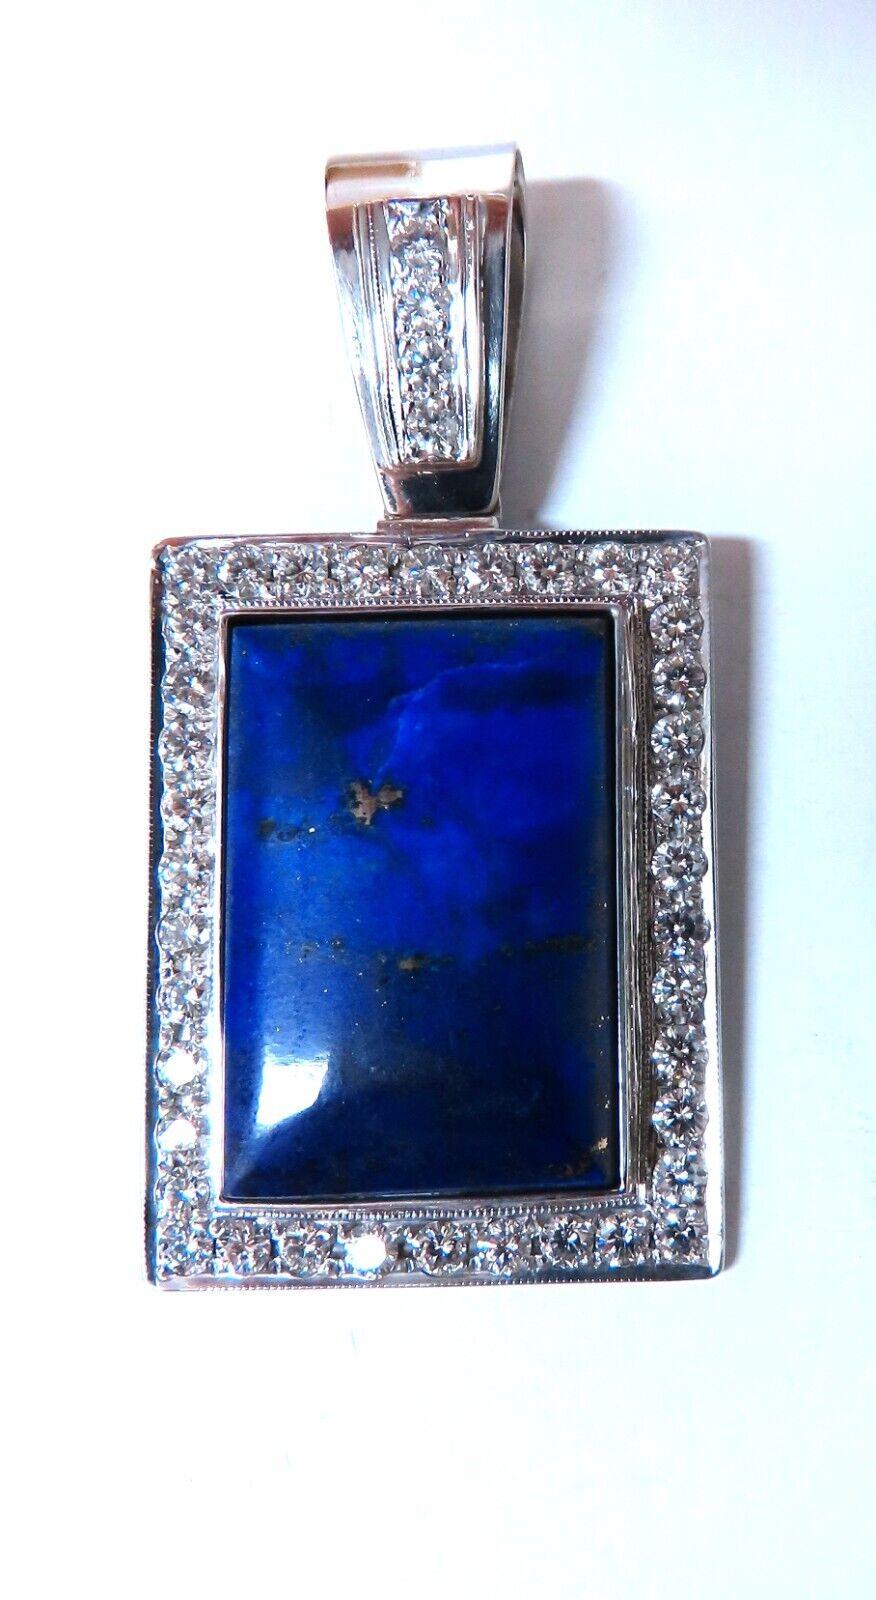 2.50ct Natural Diamonds & Lapis Pendant.

Rectangular Shaped and Cabochon cut

Vibrant Blue color

28 x 18mm

2.50ct. Natural Diamonds.

 Rounds Full cut brilliants

Vs-2 clarity H-color.

Overall pendant:

38 x 29mm (without bale)

Depth: 7mm

14Kt